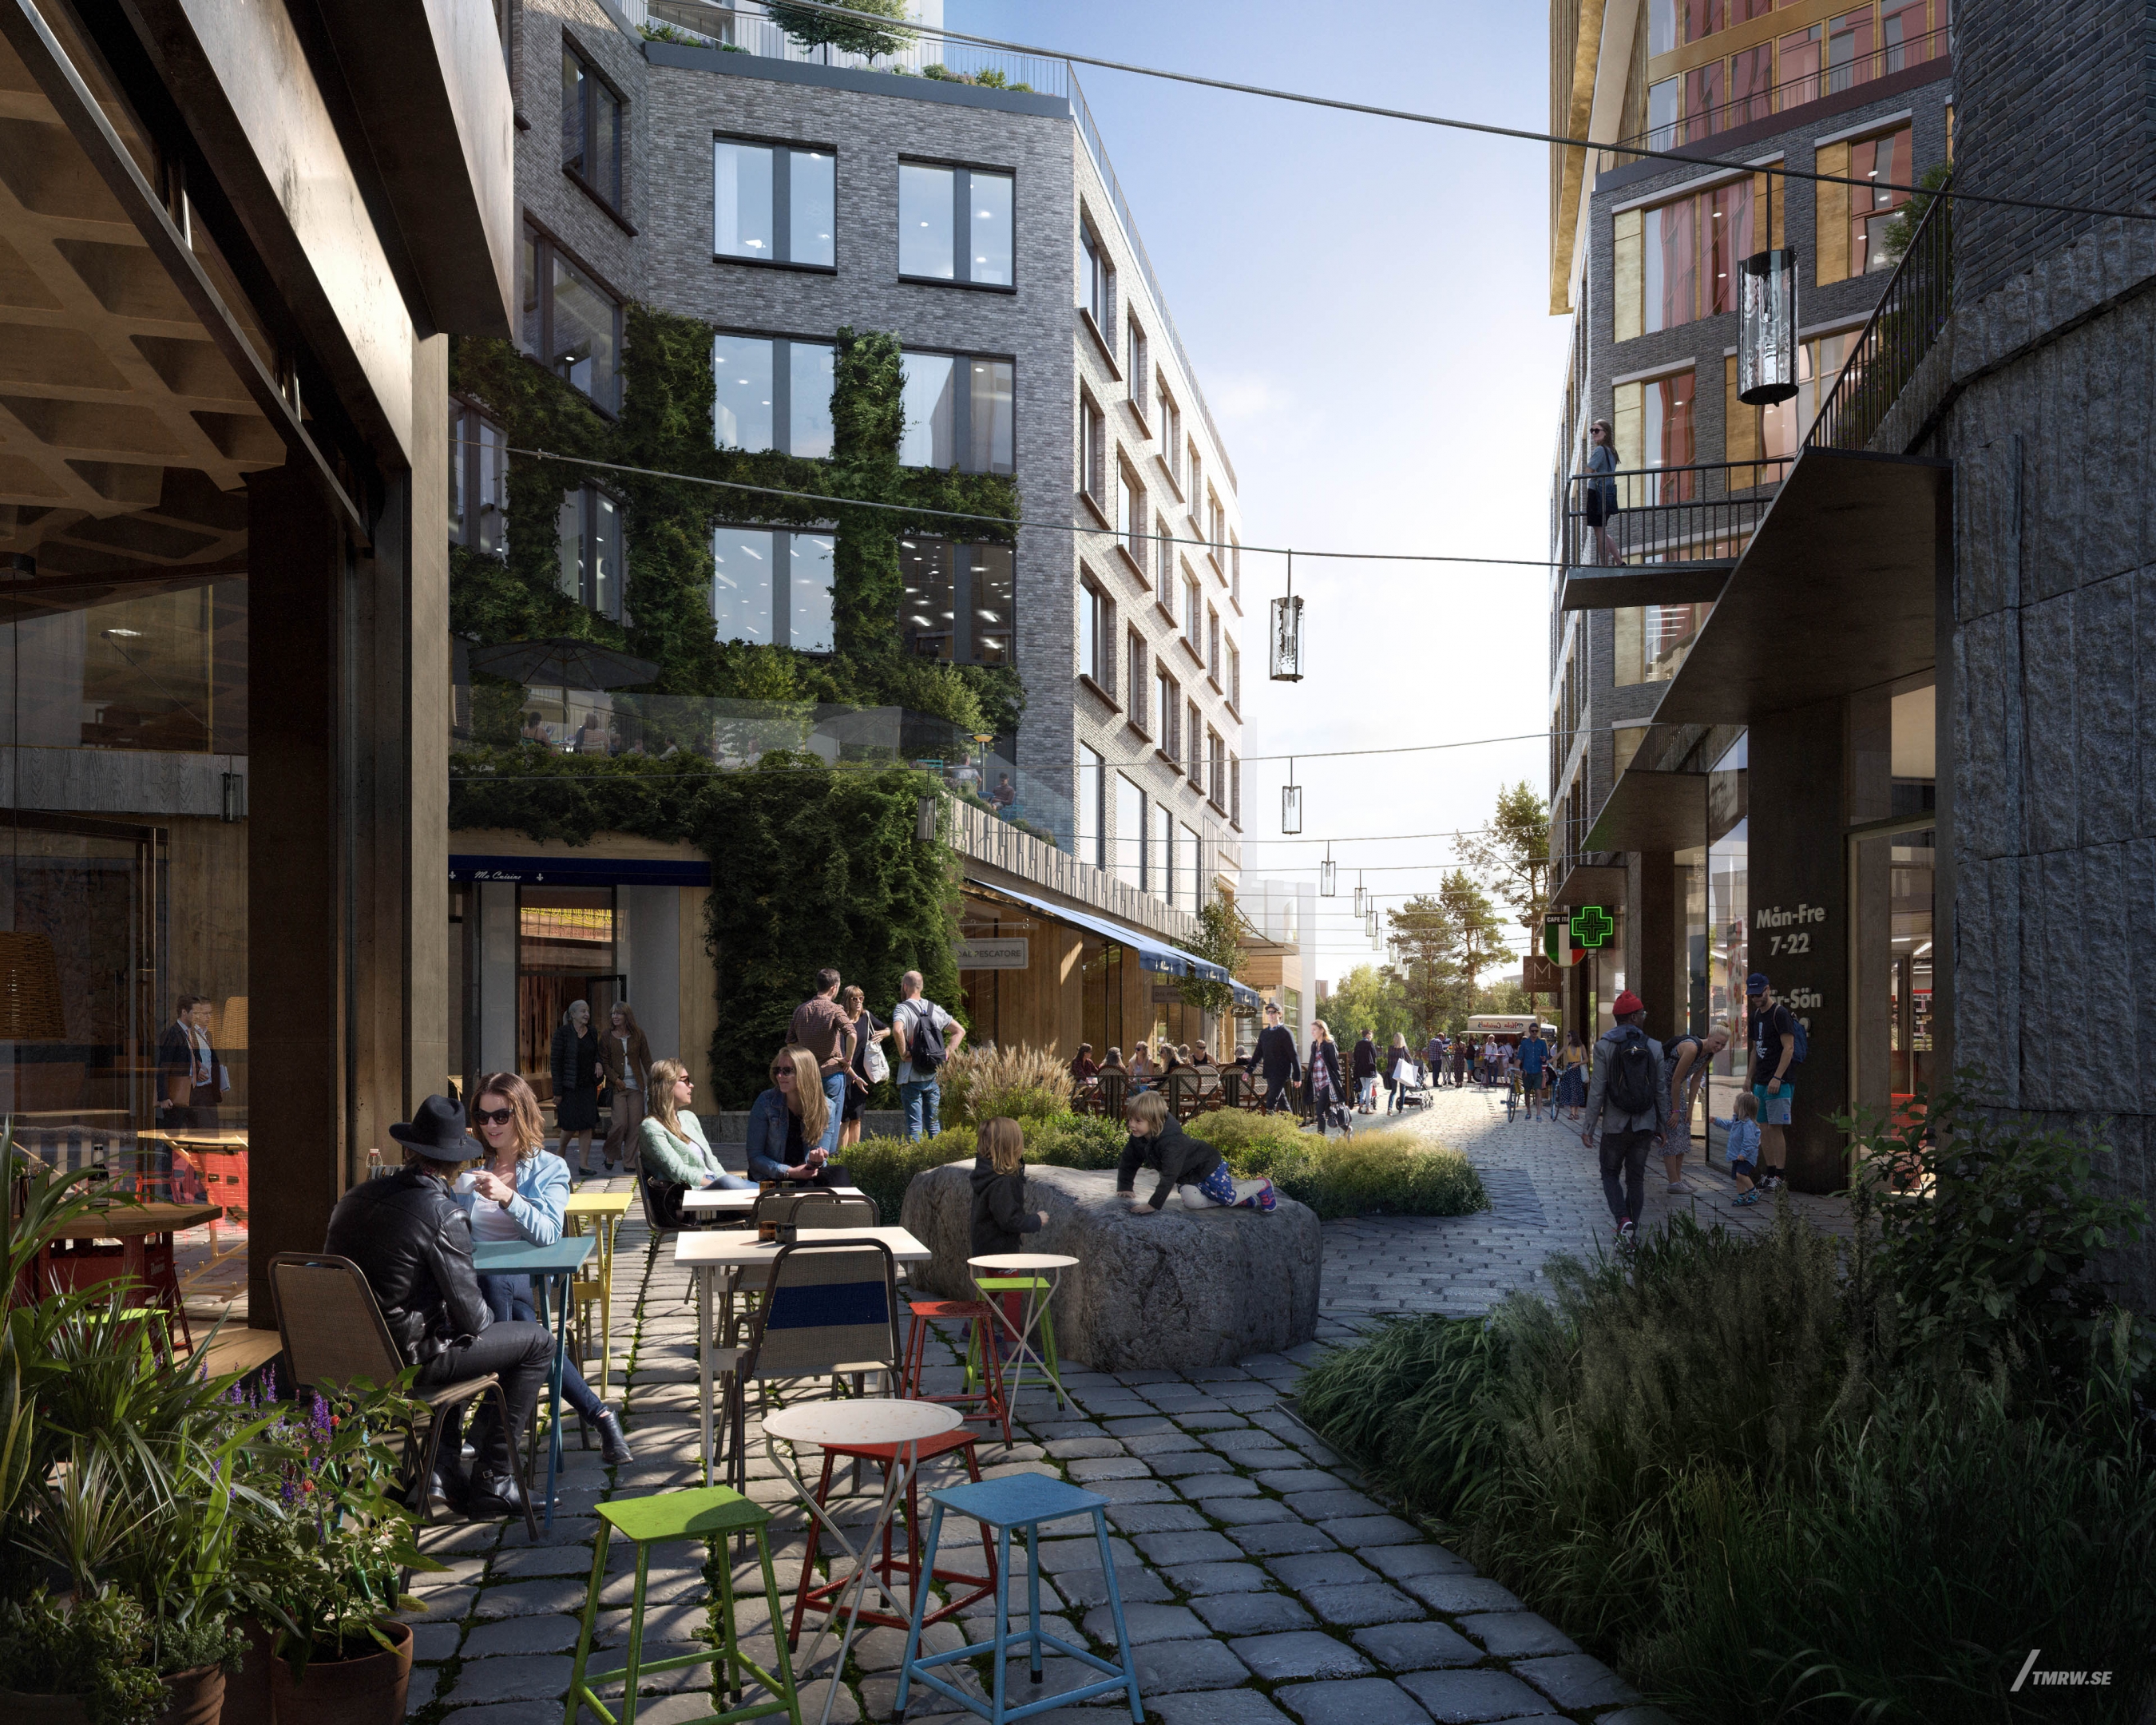 Architectural visualization of Karlastaden for Serneke a civic area with a coffee table in day light from a street view.